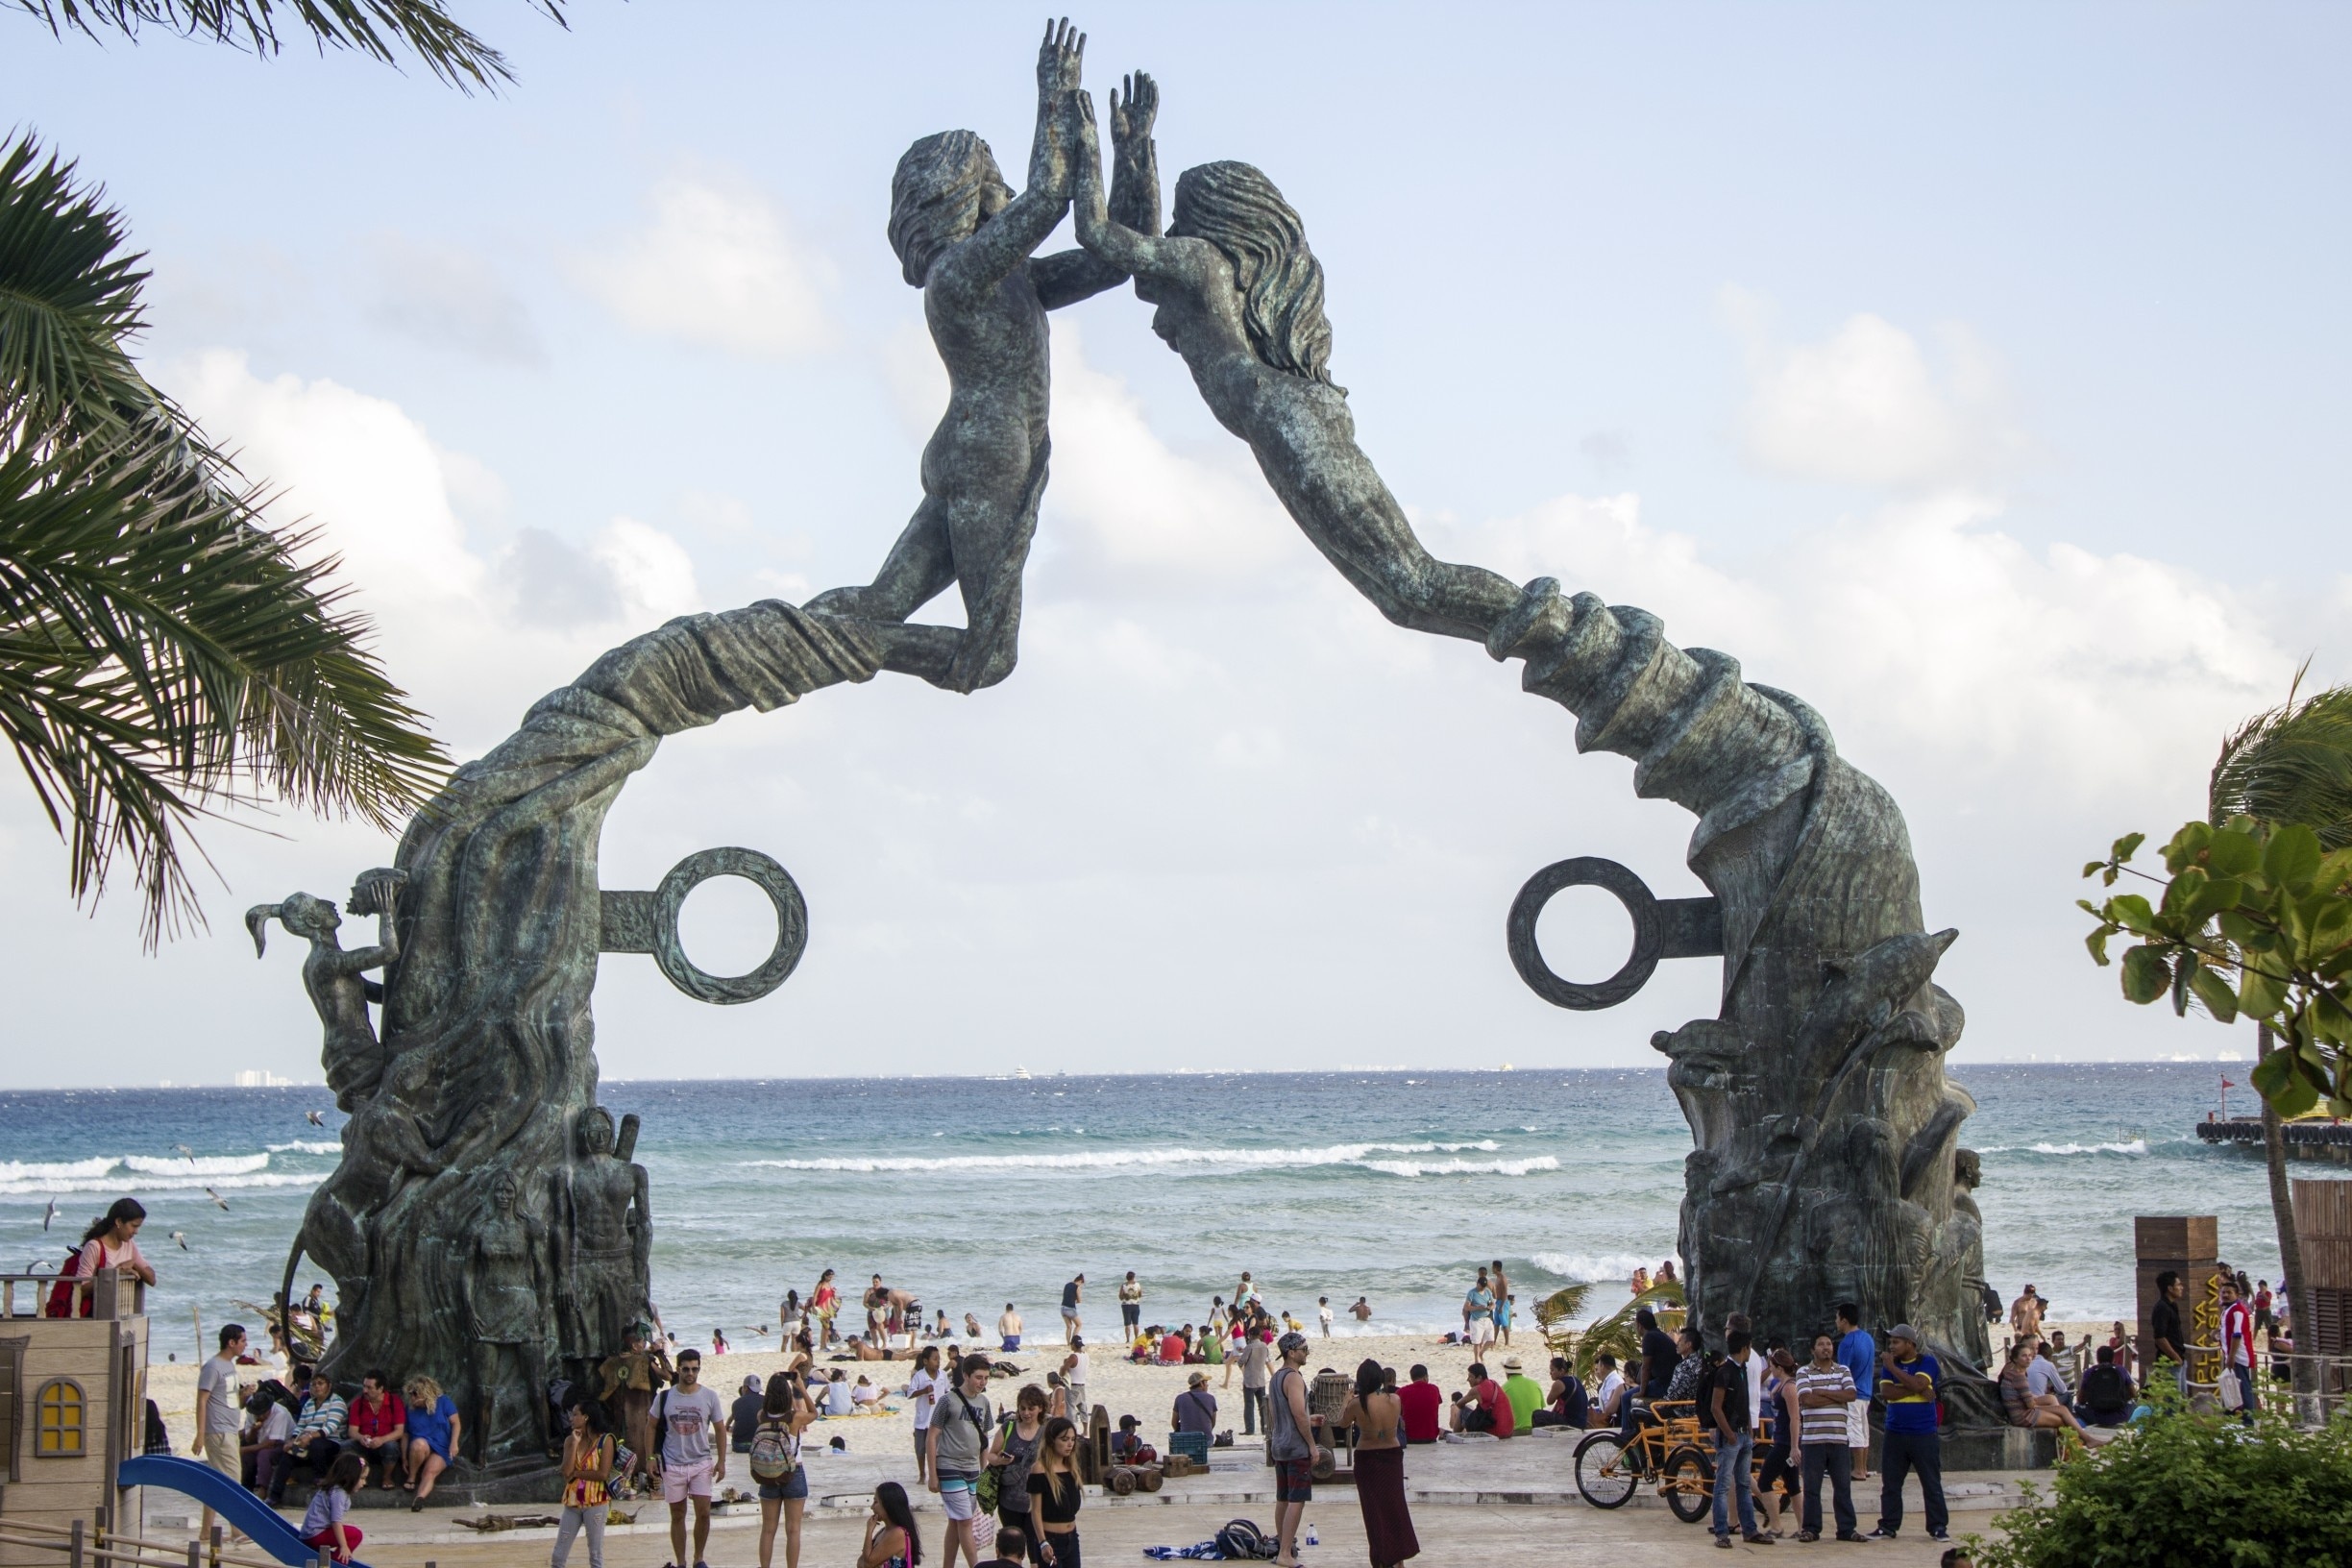 Cool monument on the beach of Playa del Carmen.